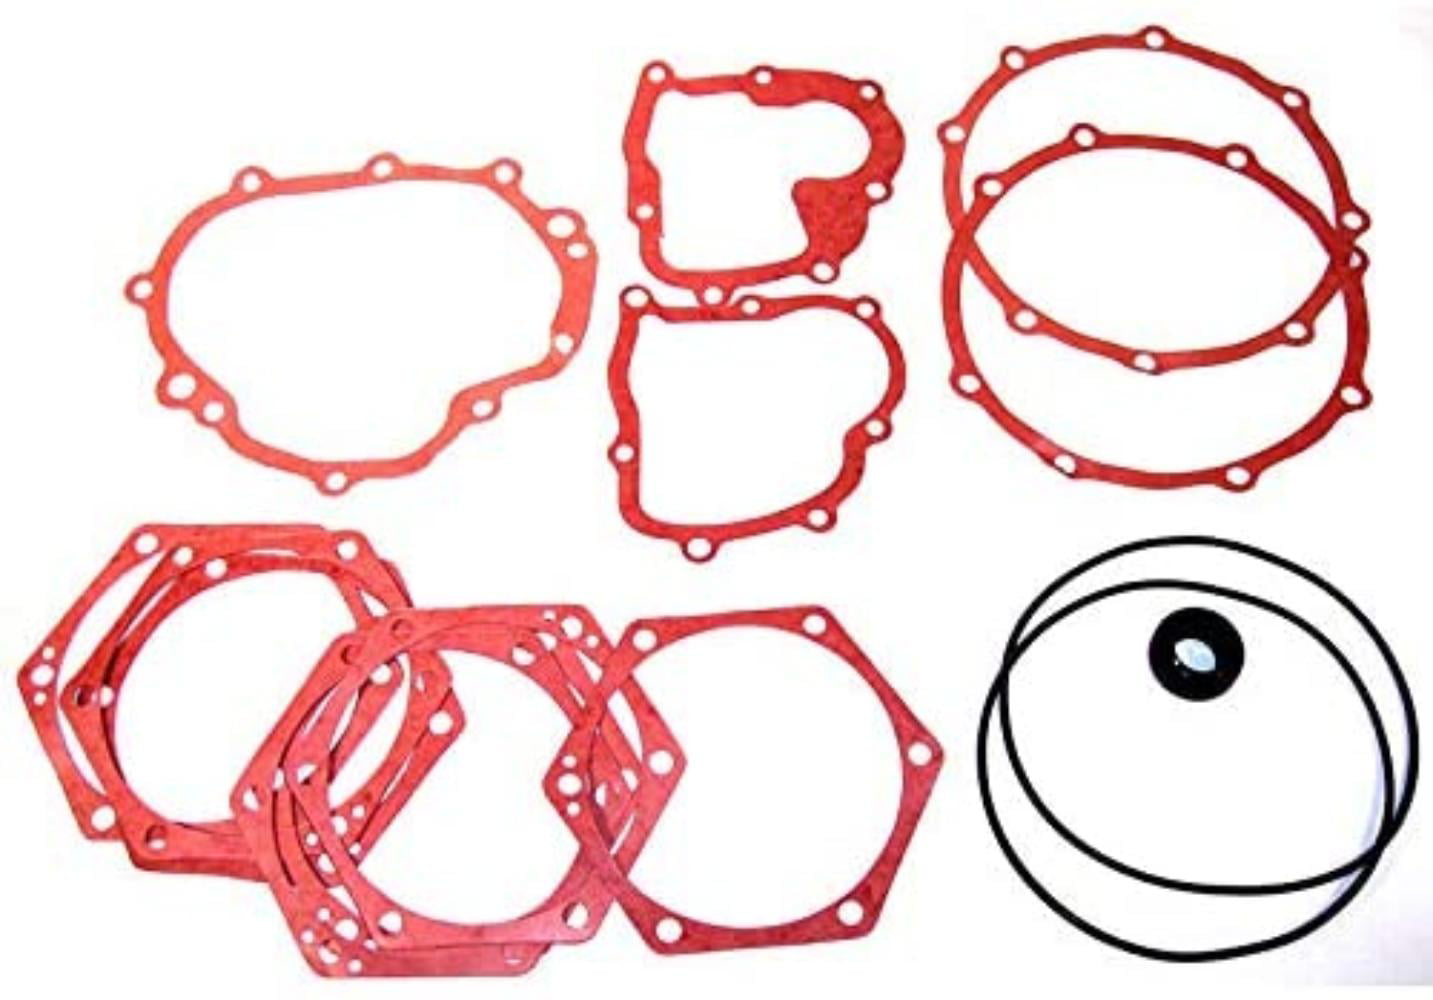 Compatible with Dune Buggy Pair Type 2 & 4 Intake Manifold Gaskets